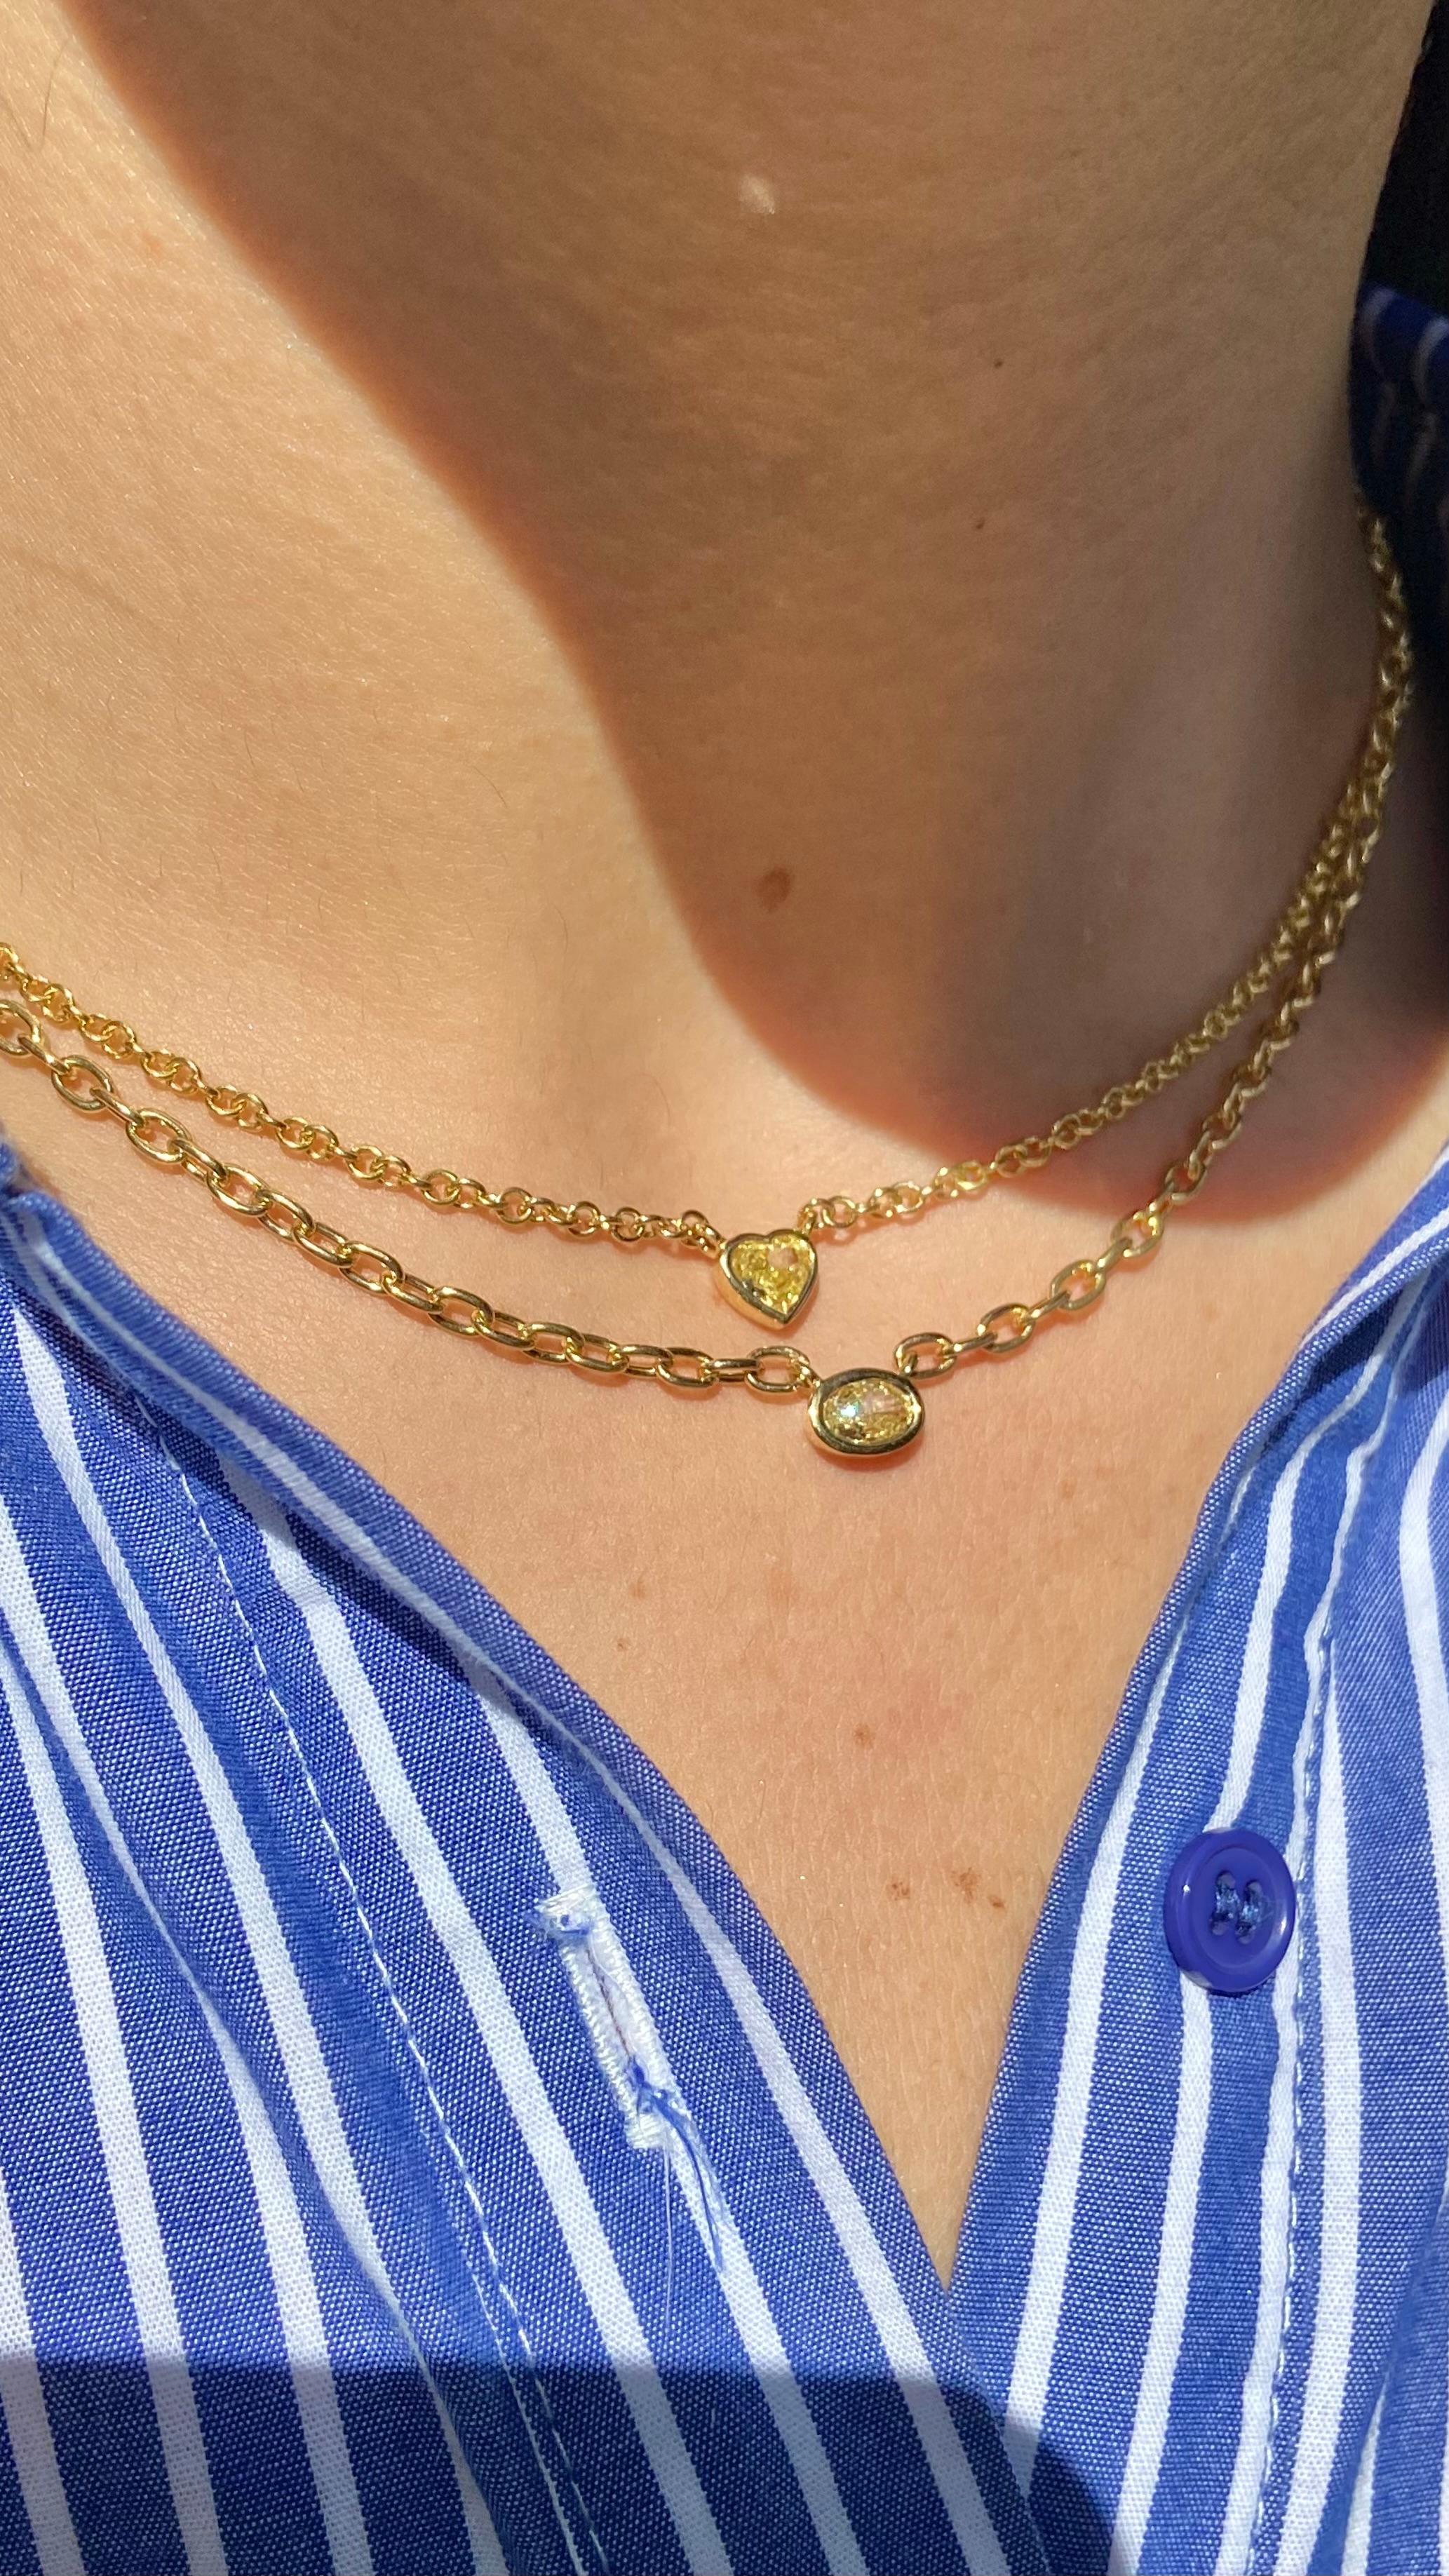 0.70 Carat 
Heart Shape Diamond
Light Yellow
VS+ Clarity 
18k Yellow Solid Gold Chain
16 Inches
Gold Bezel Setting
Handmade in NYC 

This piece can be viewed before purchase in our showroom in NYC, or at one of our retail partners throughout the